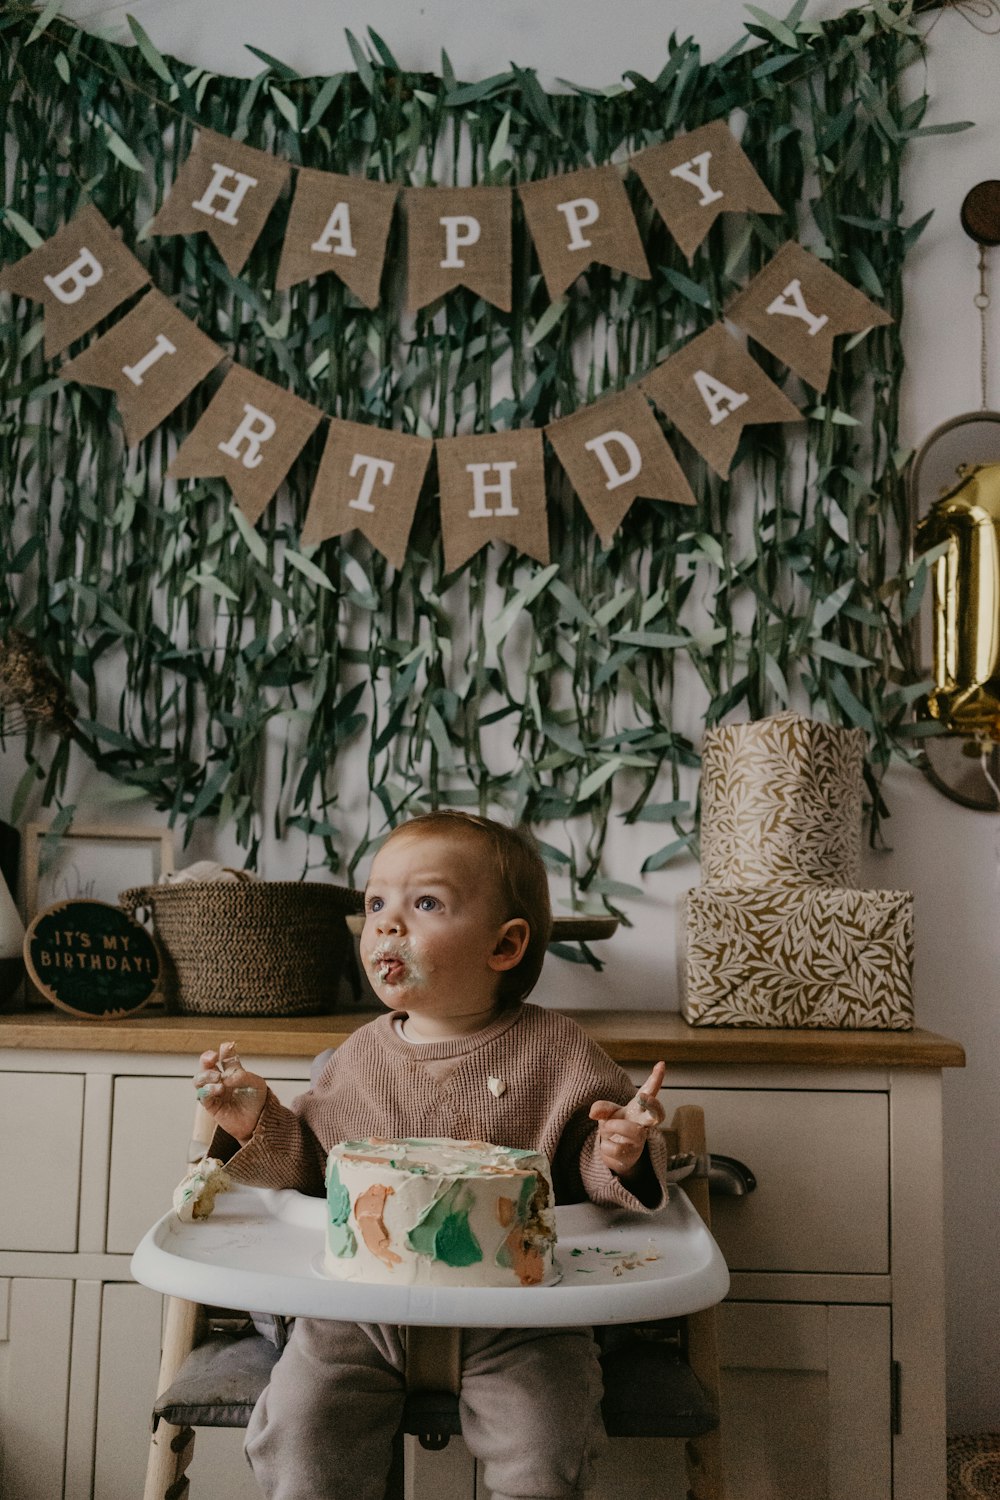 a baby sitting in a high chair with a birthday cake